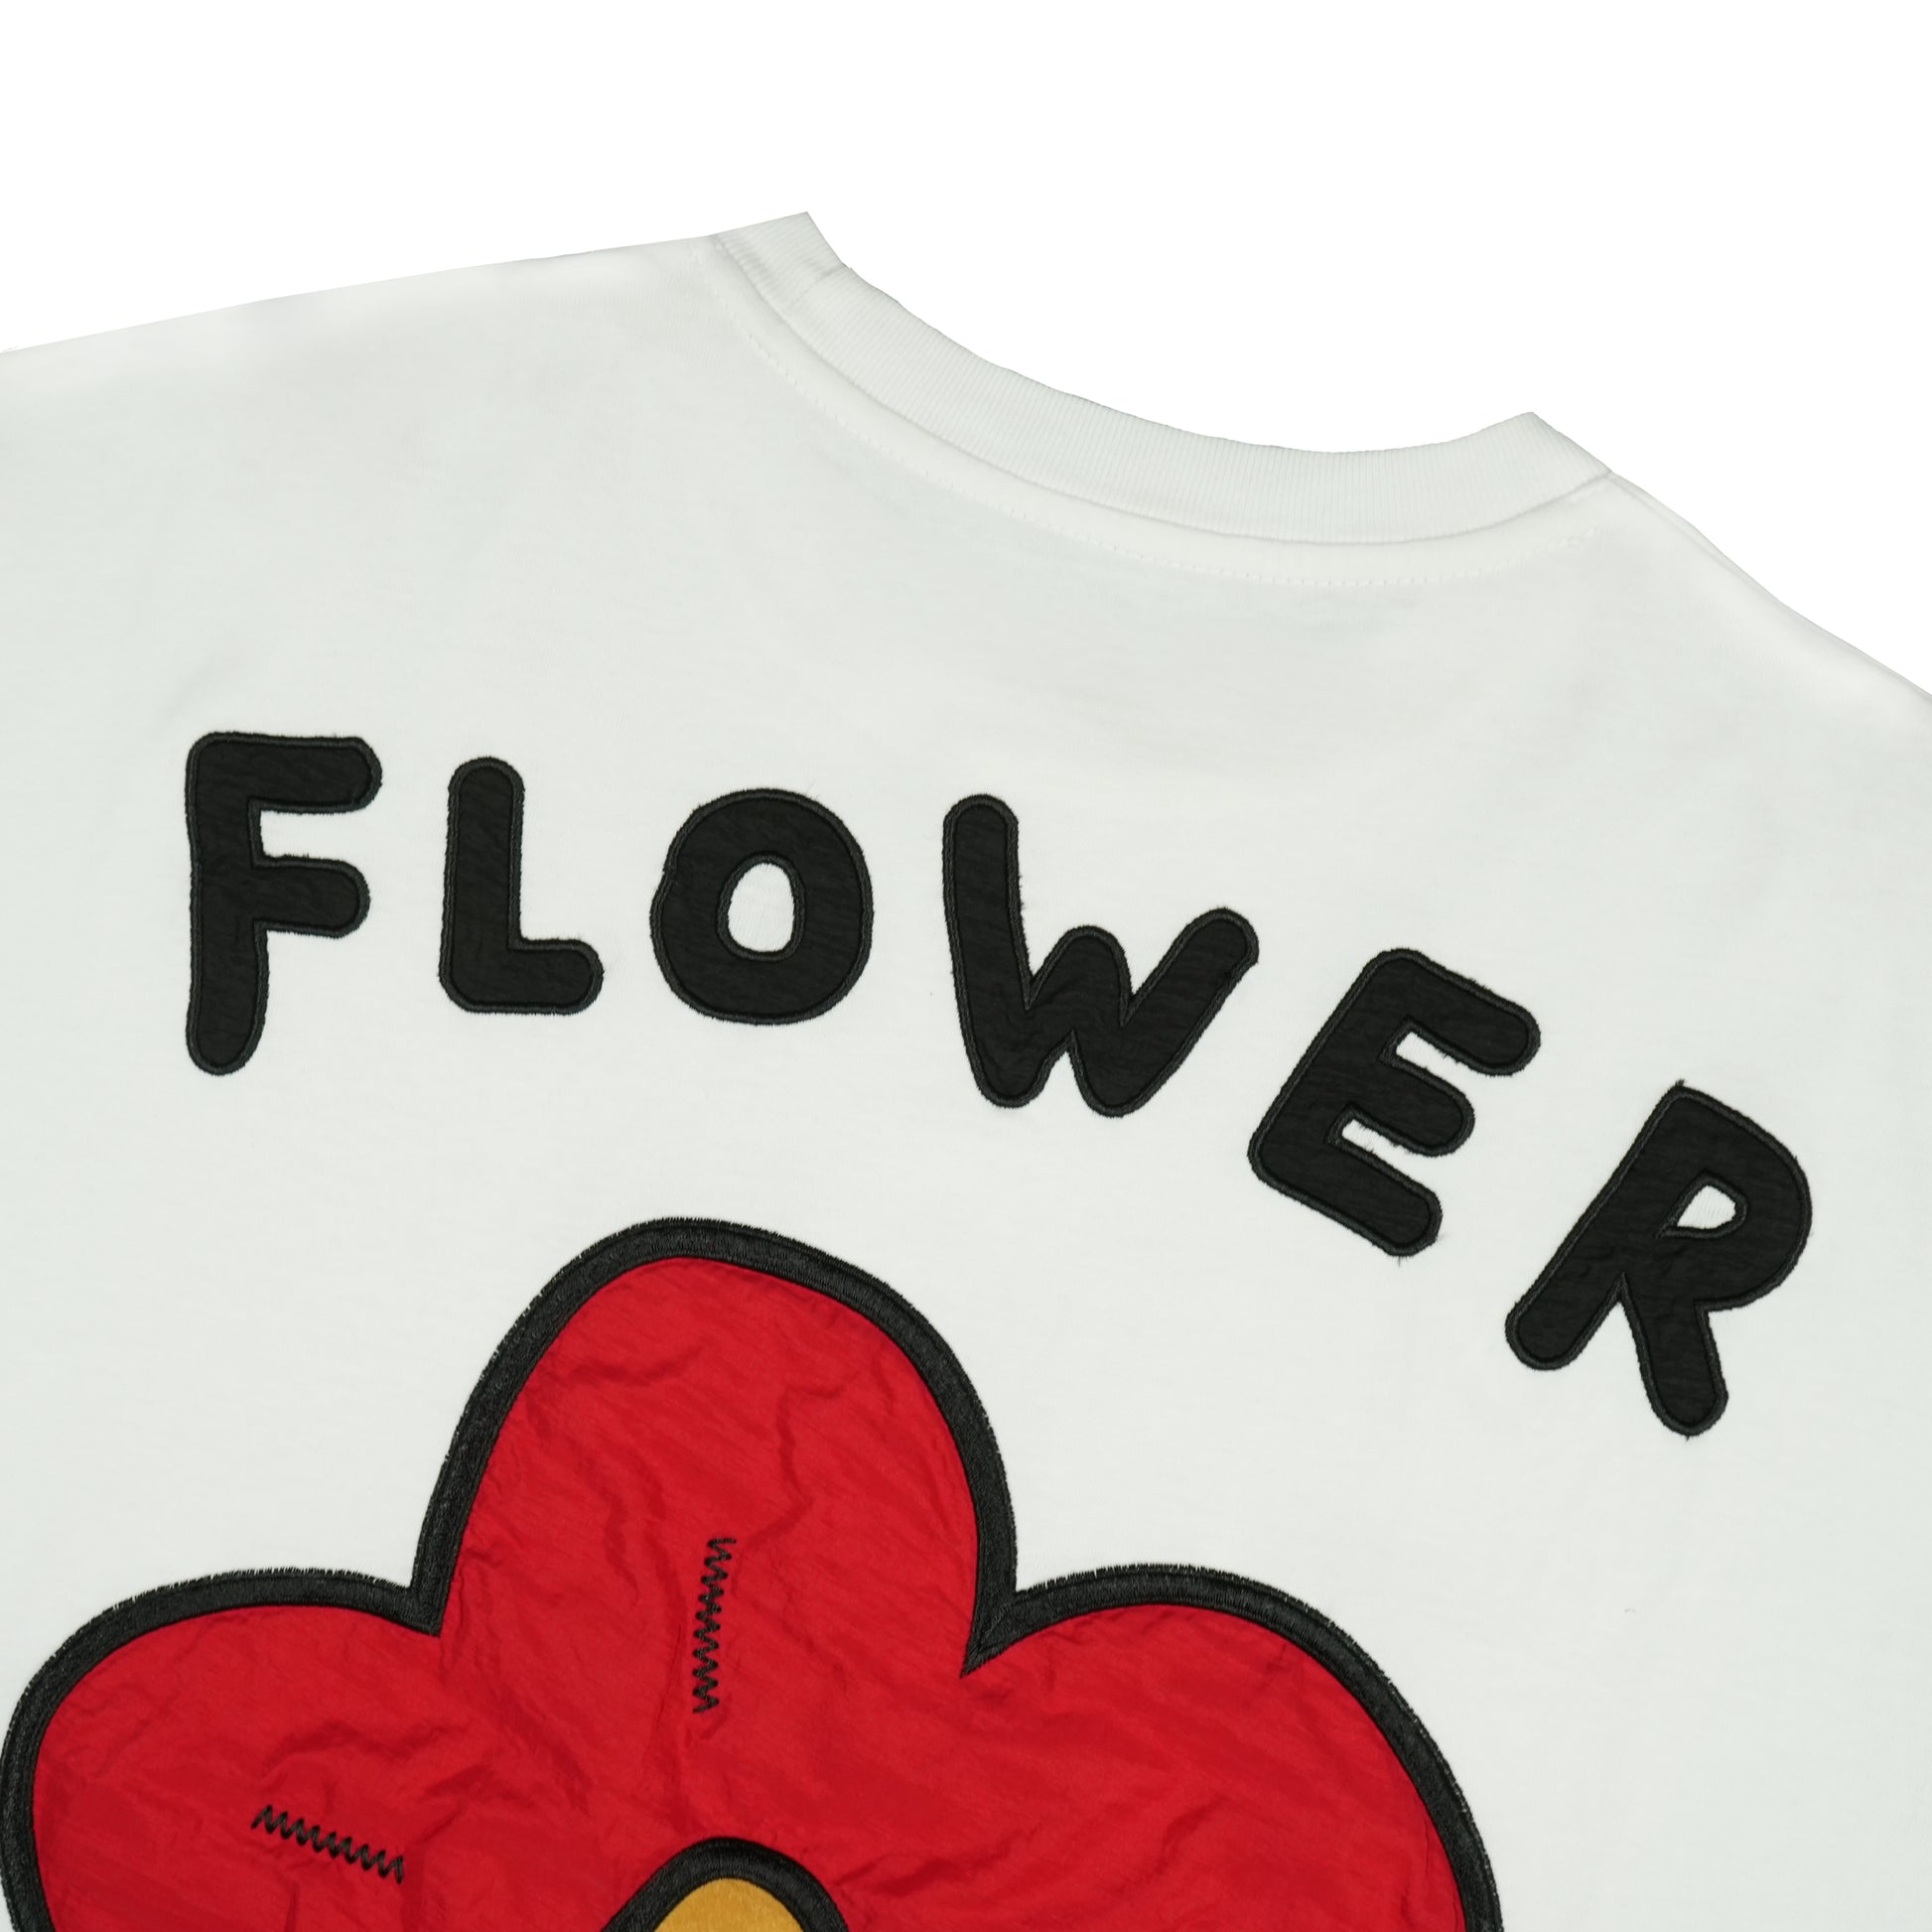 Toson, Copy of "Flower" Patchwork T-shirt - White